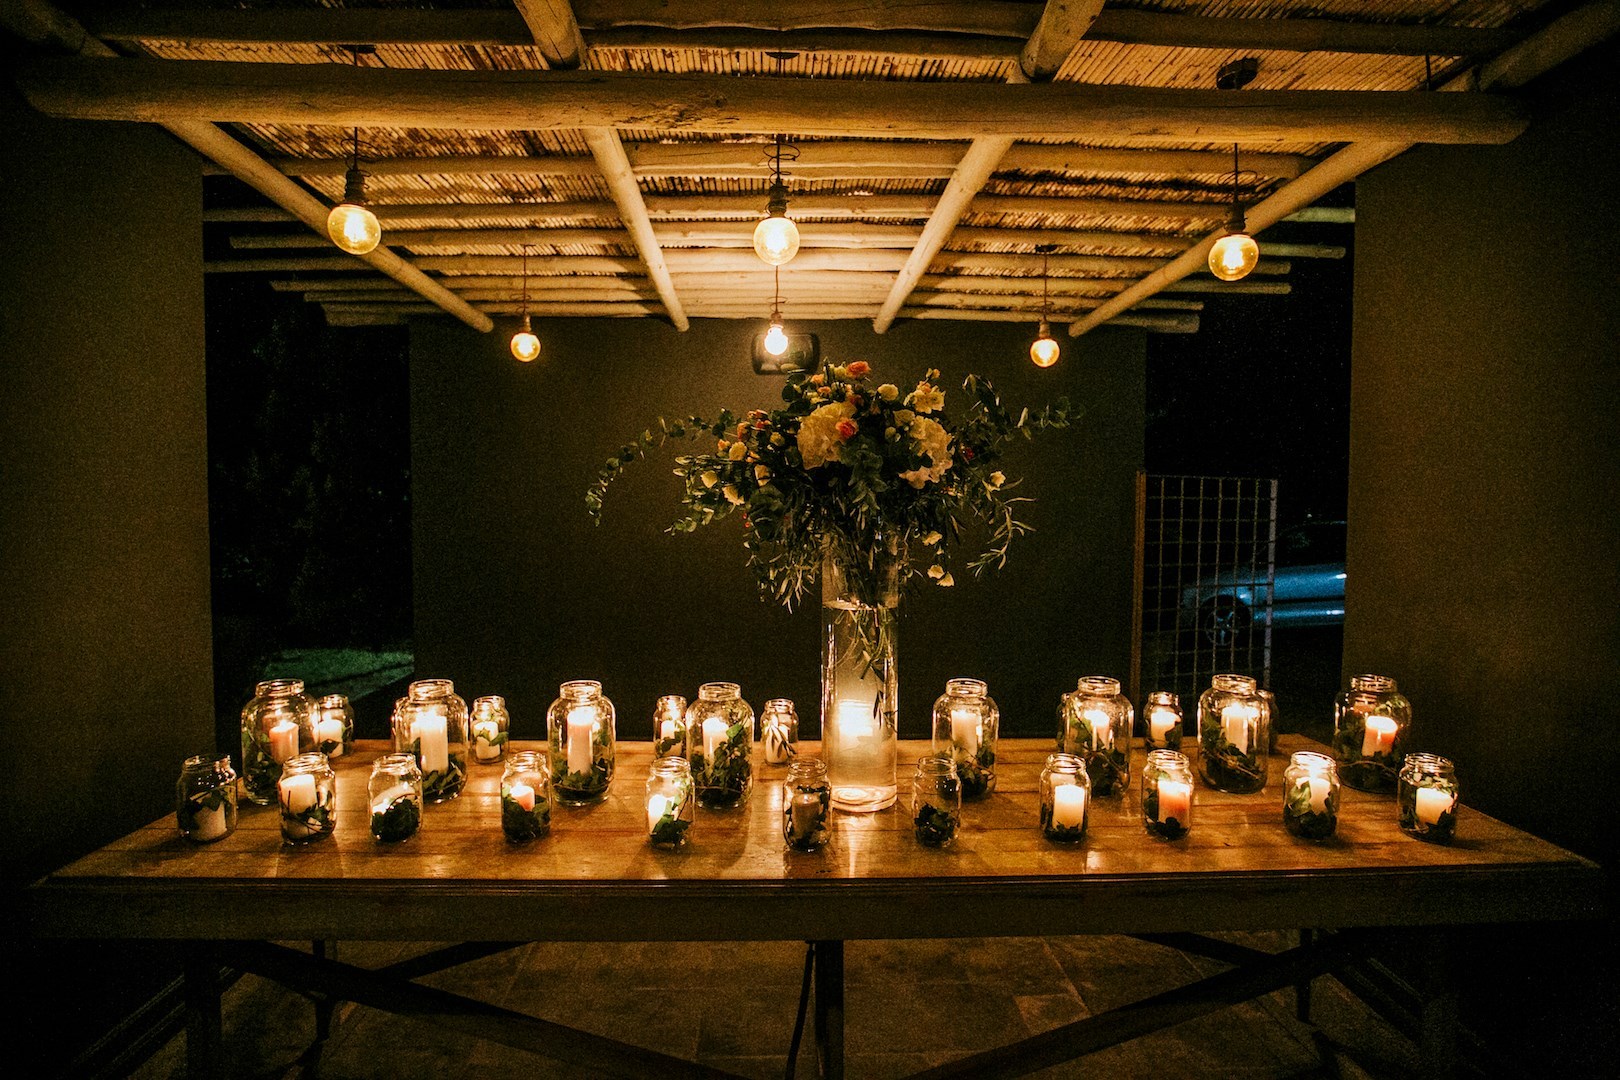 Ideas and inspiration for a Modern & simple wedding